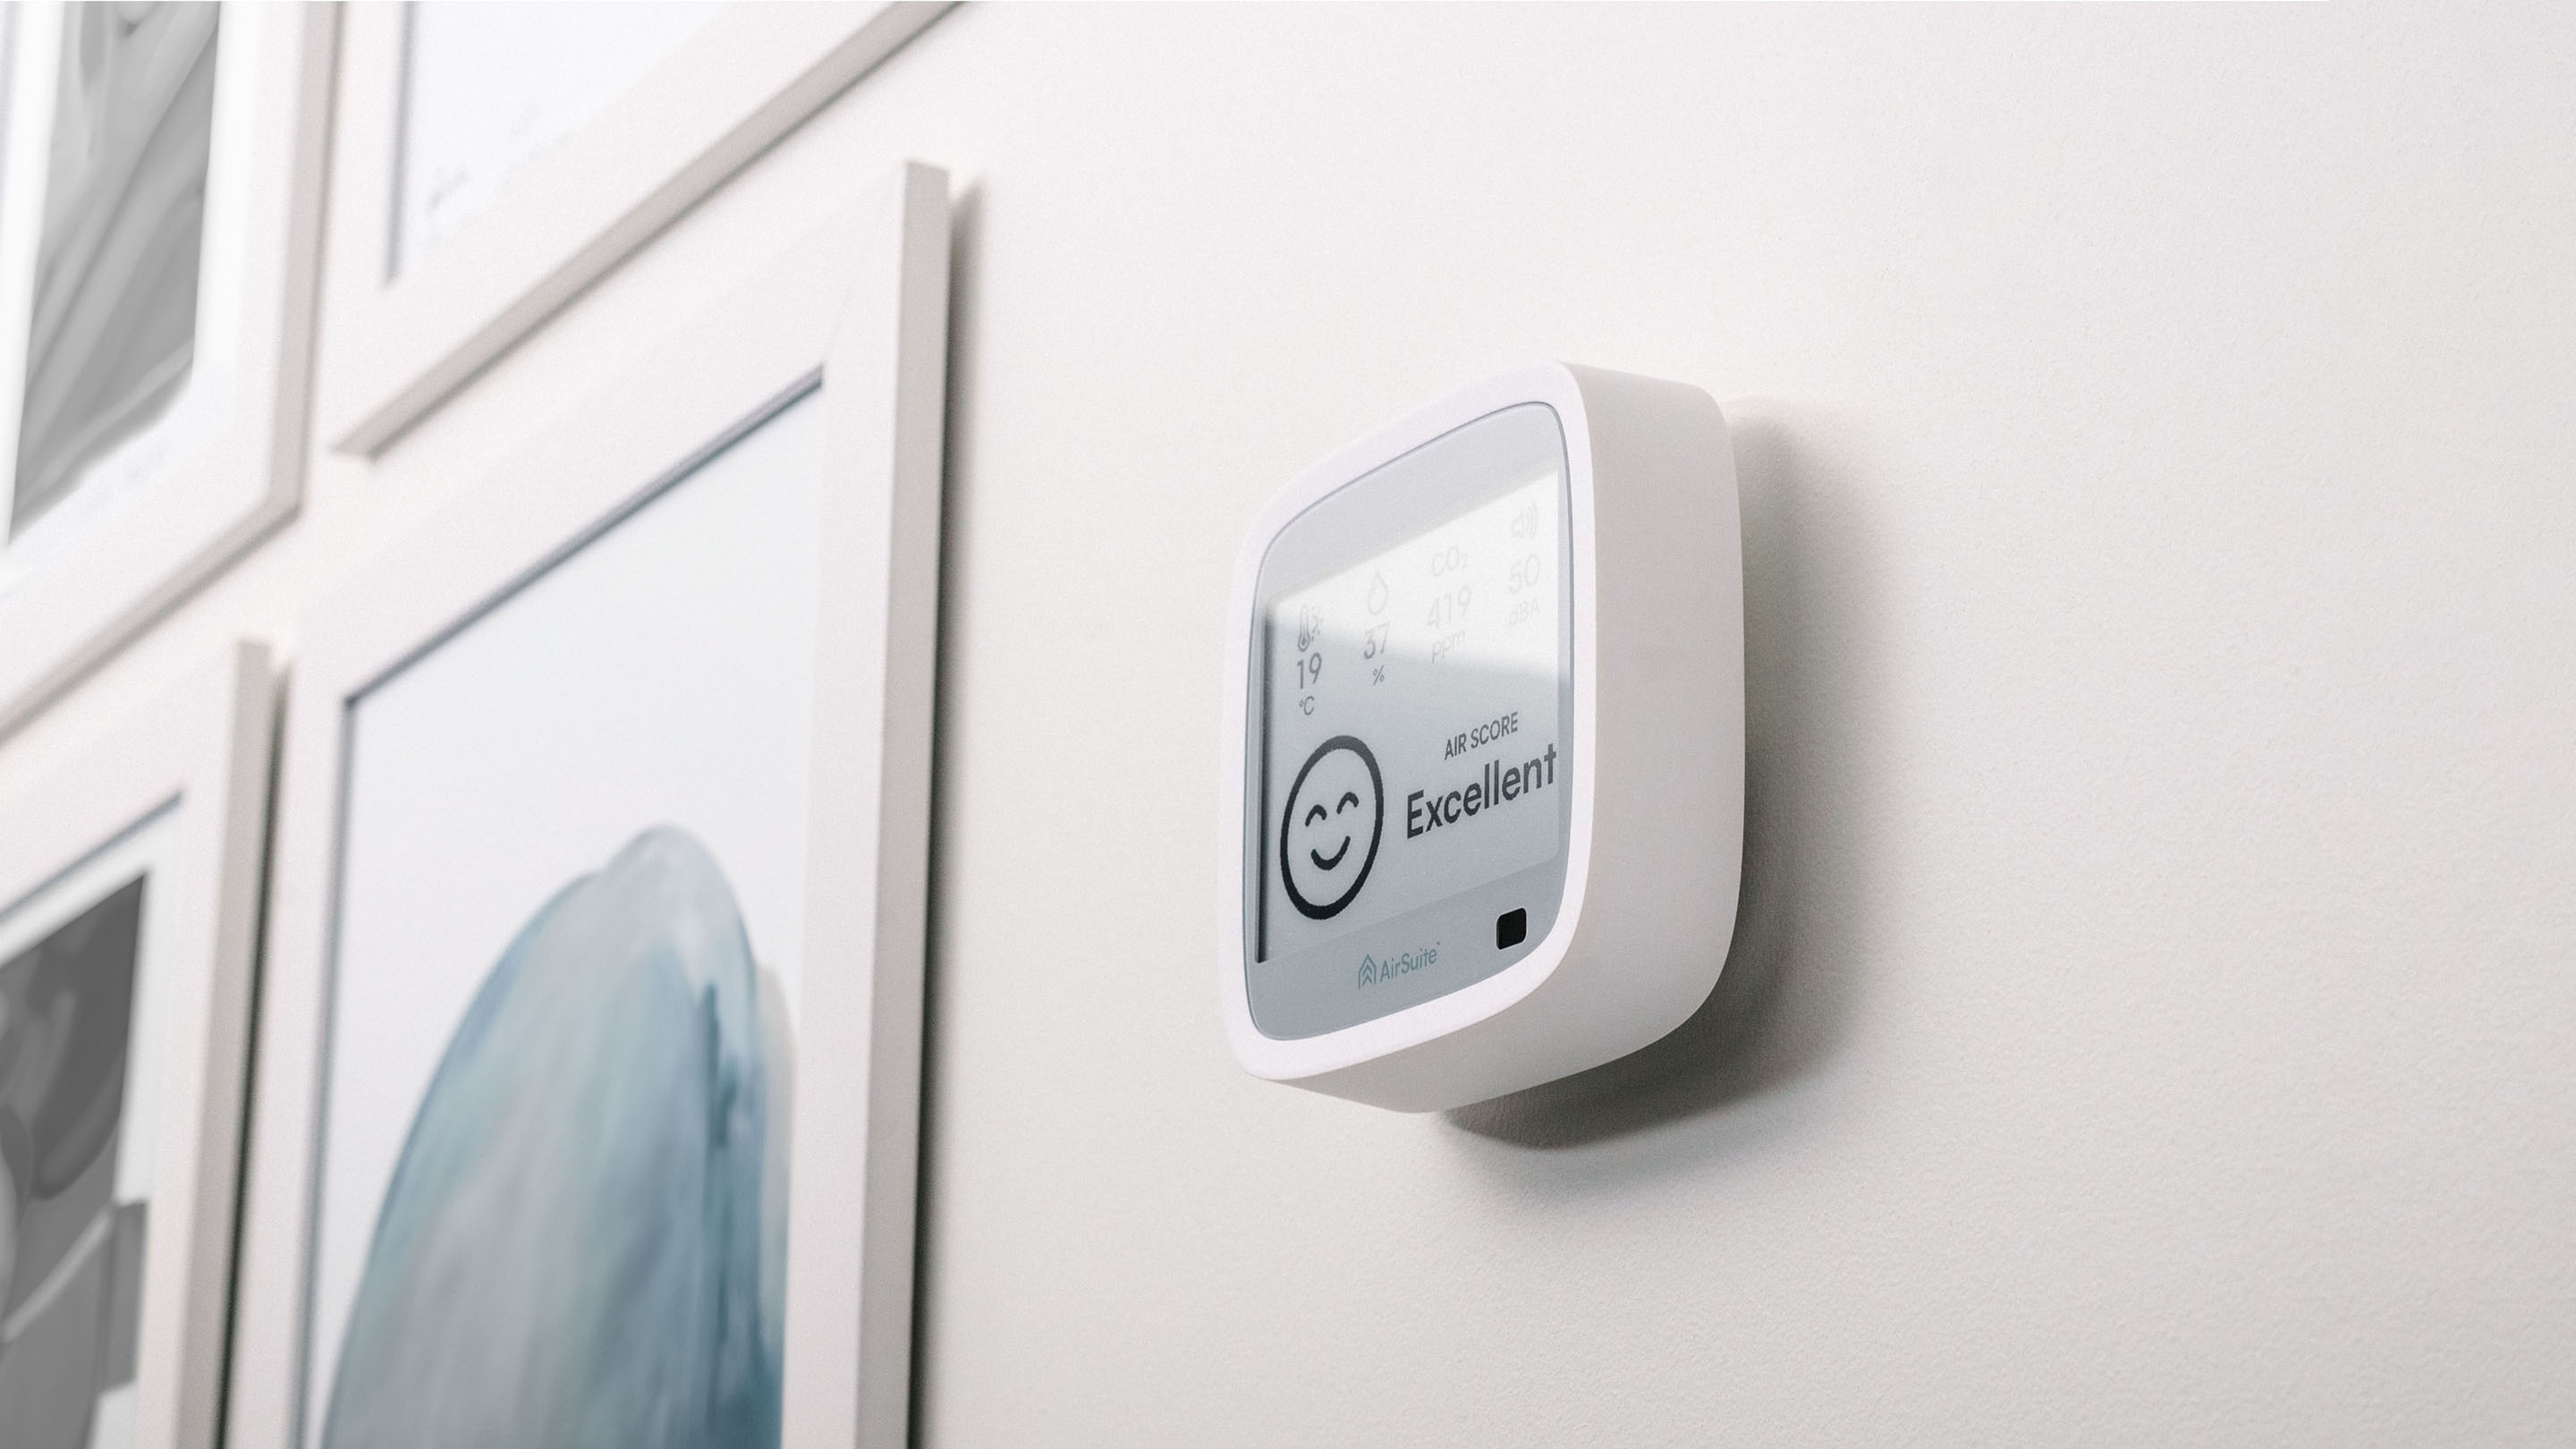 An AirSuite Glance device mounted on the wall next to some picture frames